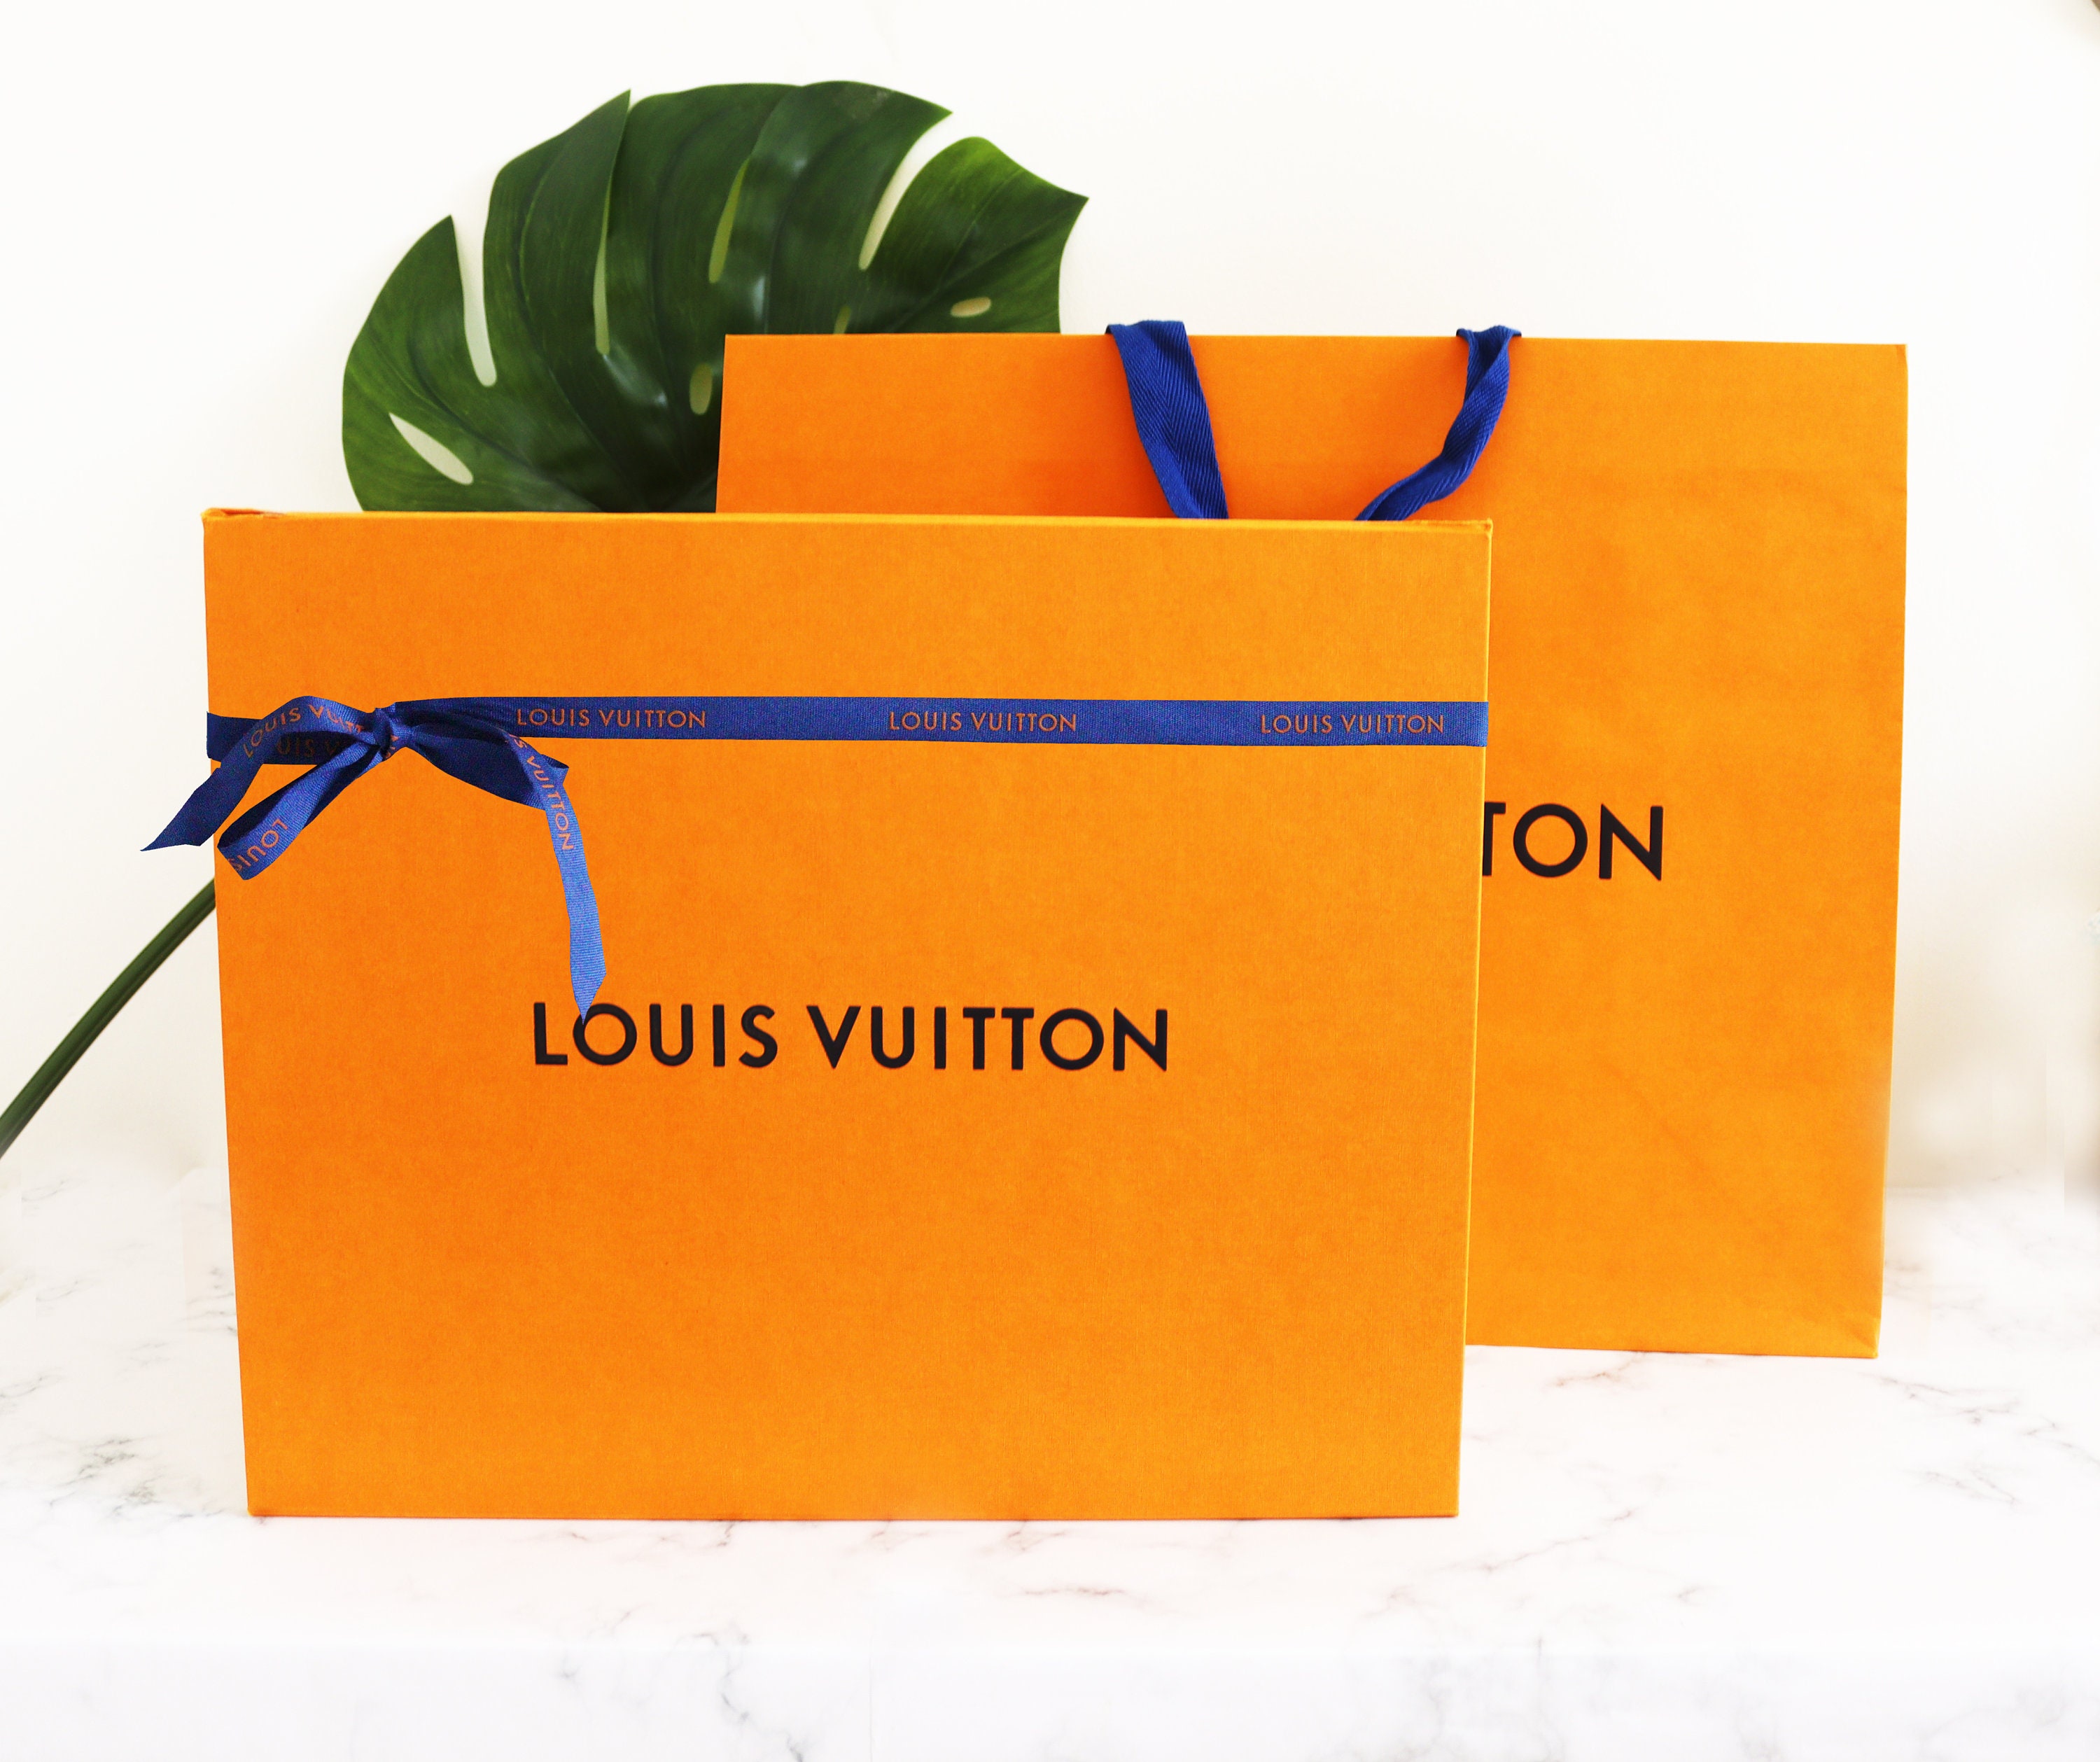 LOUIS VUITTON Authentic Empty Gift Box Shopping Bag Small Medium Large